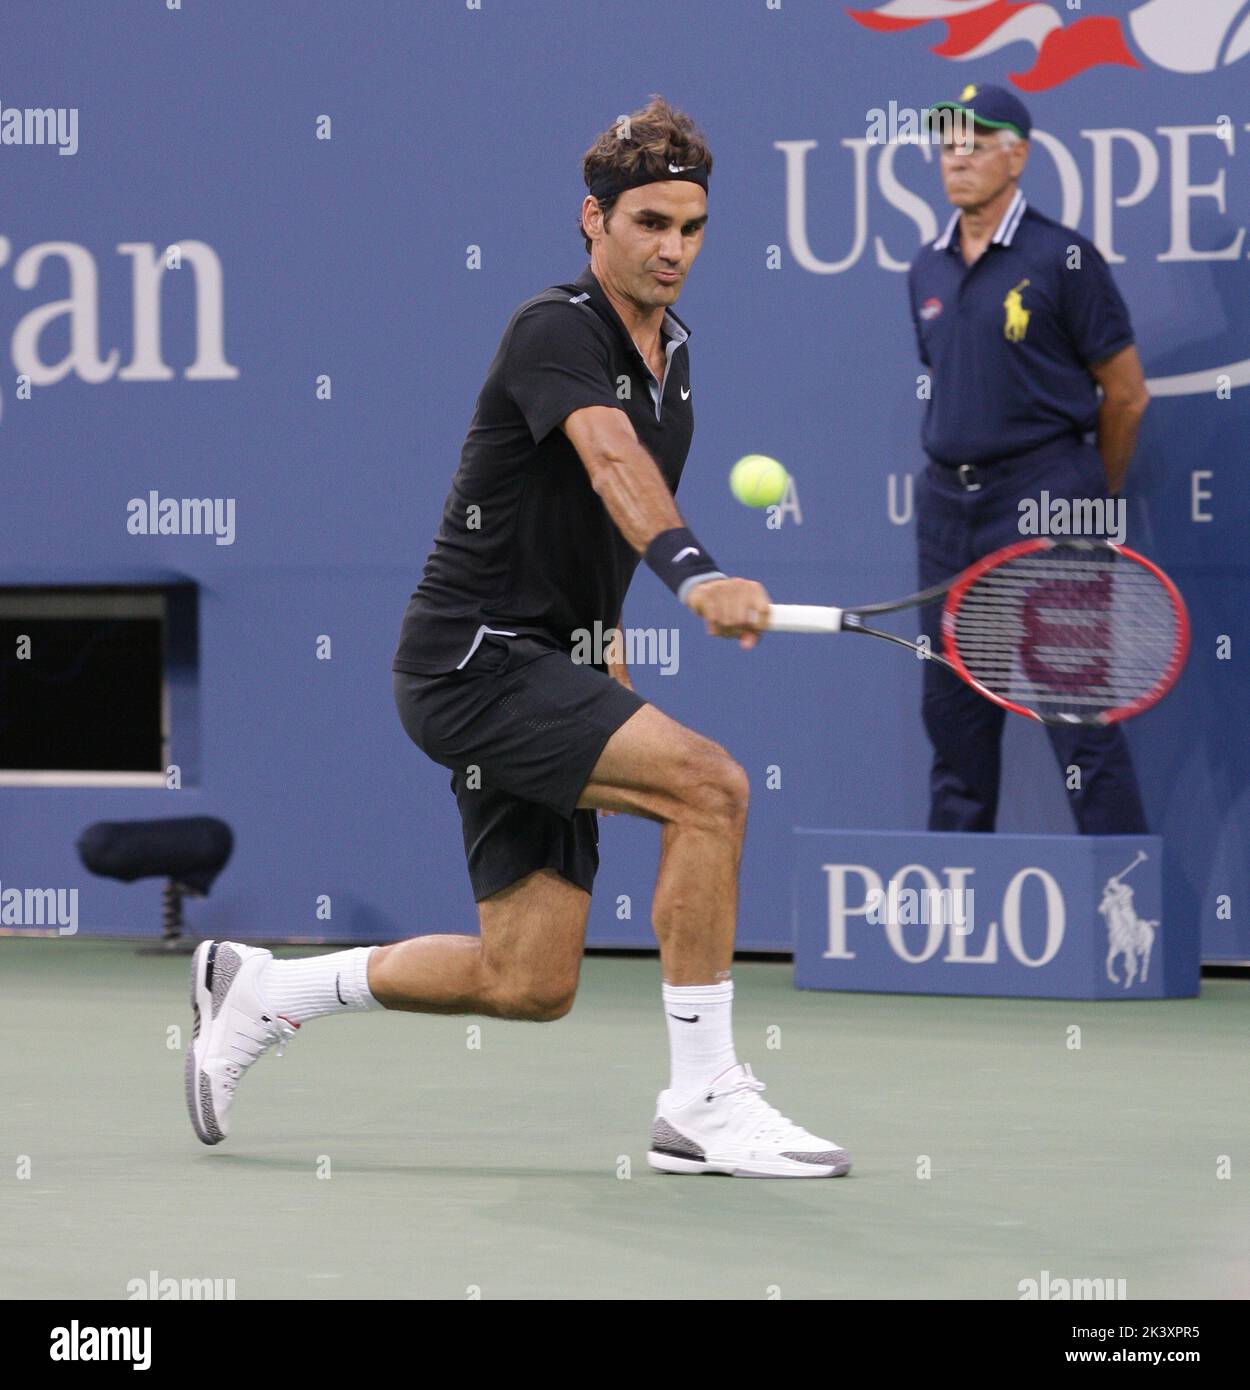 FLUSHING NY- AUGUST:  Roger Federer, at the 2014 US Open at the USTA Billie Jean King National Tennis Center on August, 2014 in the Flushing neighborhood of the Queens borough of New York City   People:  Roger Federer Stock Photo